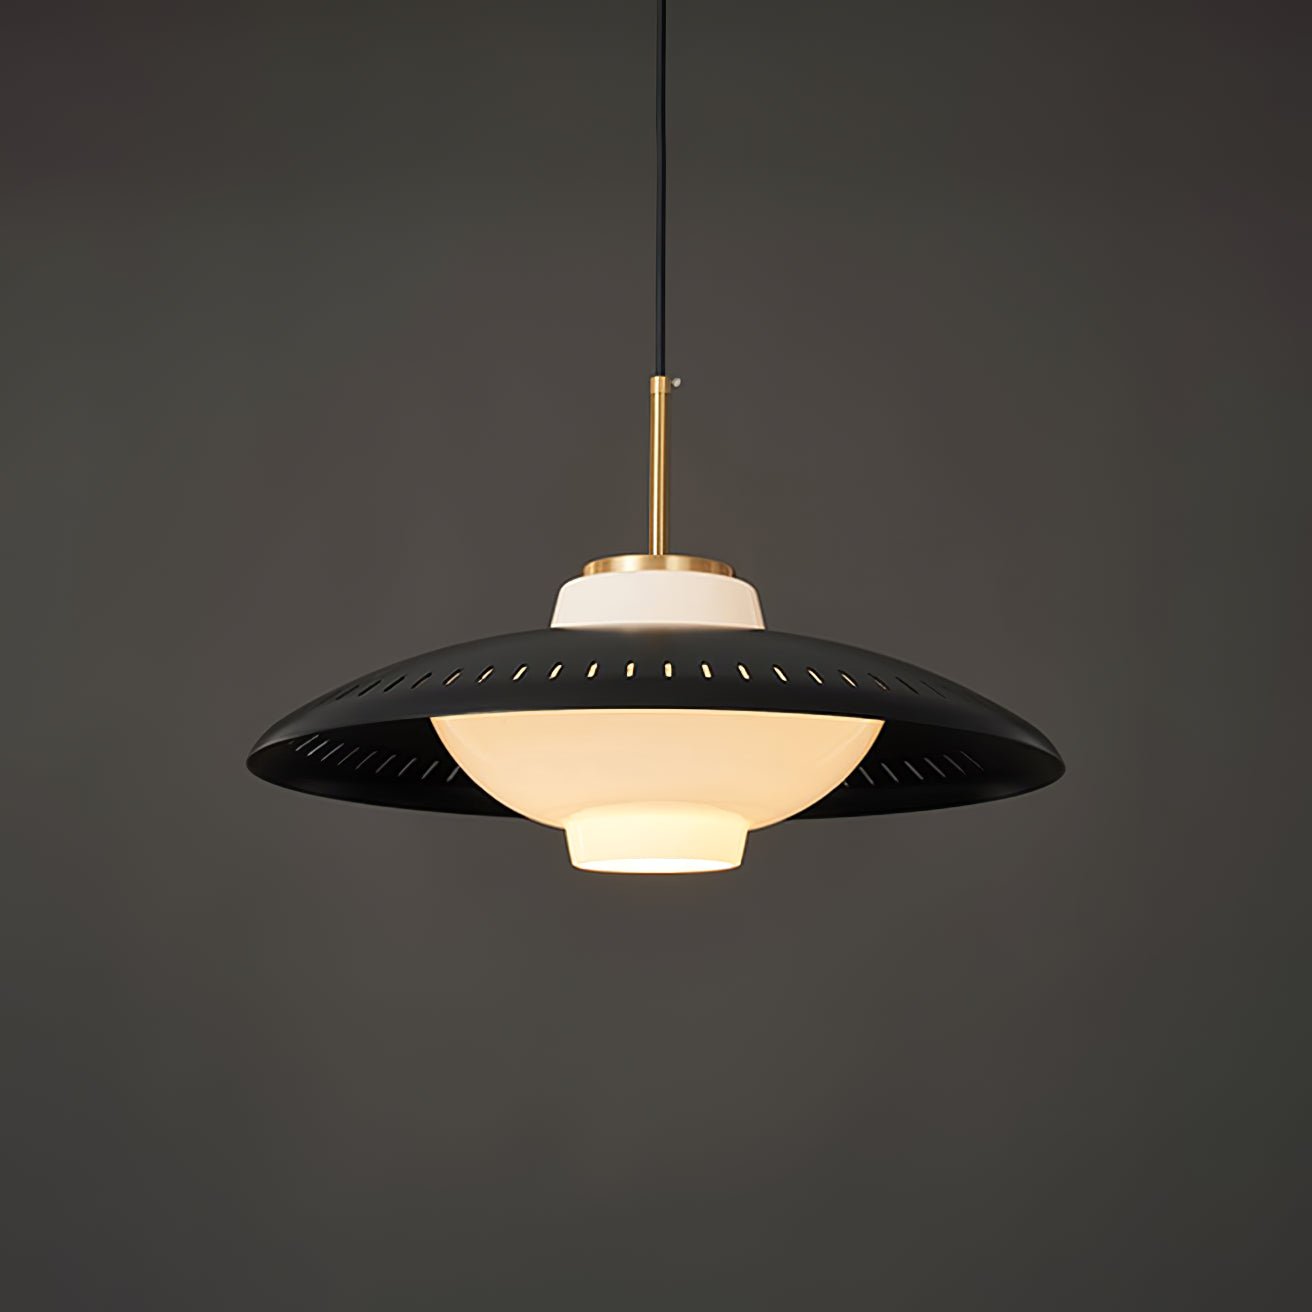 Black Pendant Lamp with Opal Shade measuring 17.7 inches in diameter and 8.8 inches in height, or 45cm in diameter and 22.5cm in height.